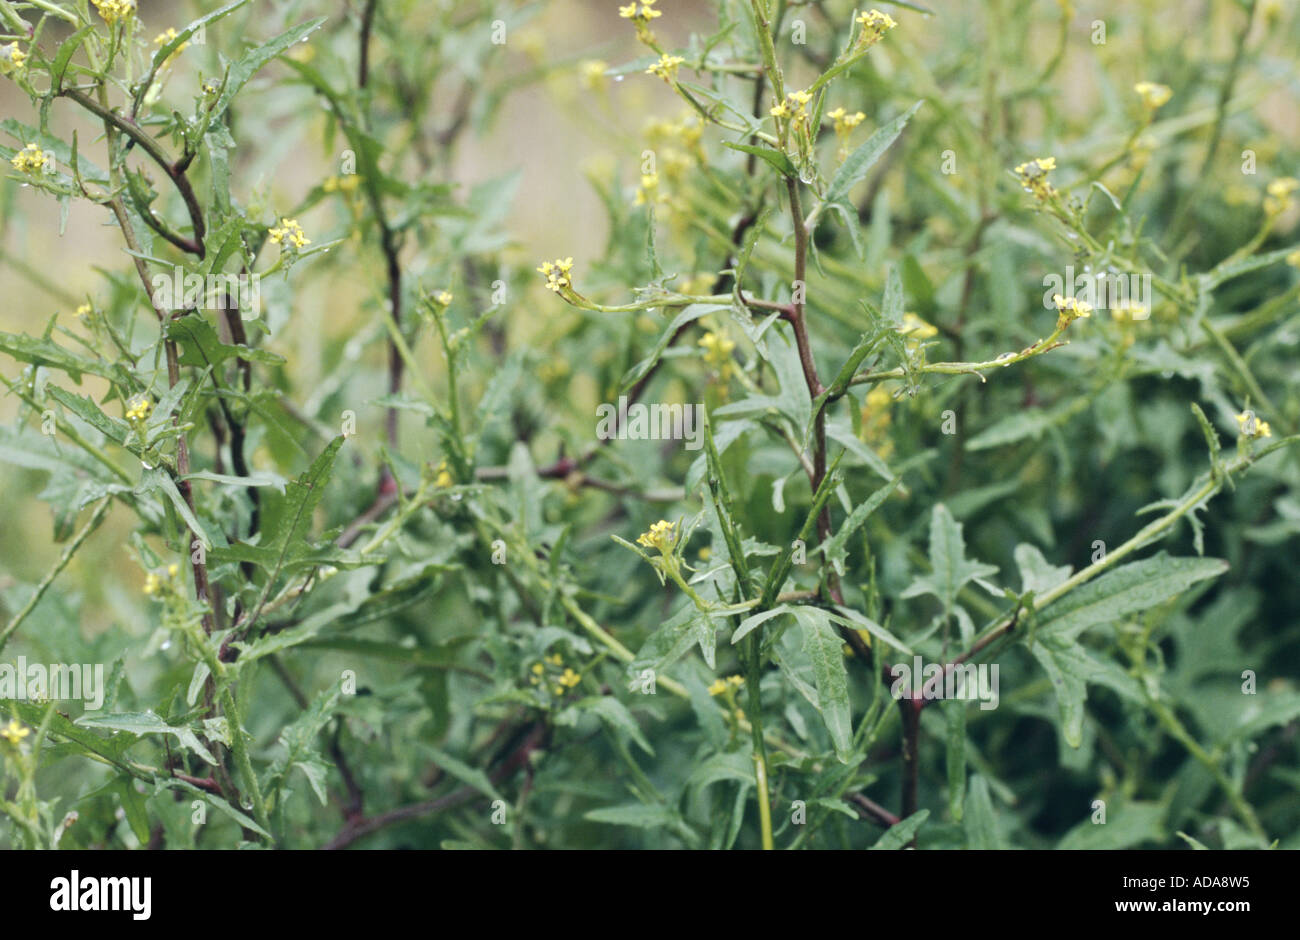 common hedge mustard, hairy-pod hedge mustard (Sisymbrium officinale), blooming Stock Photo